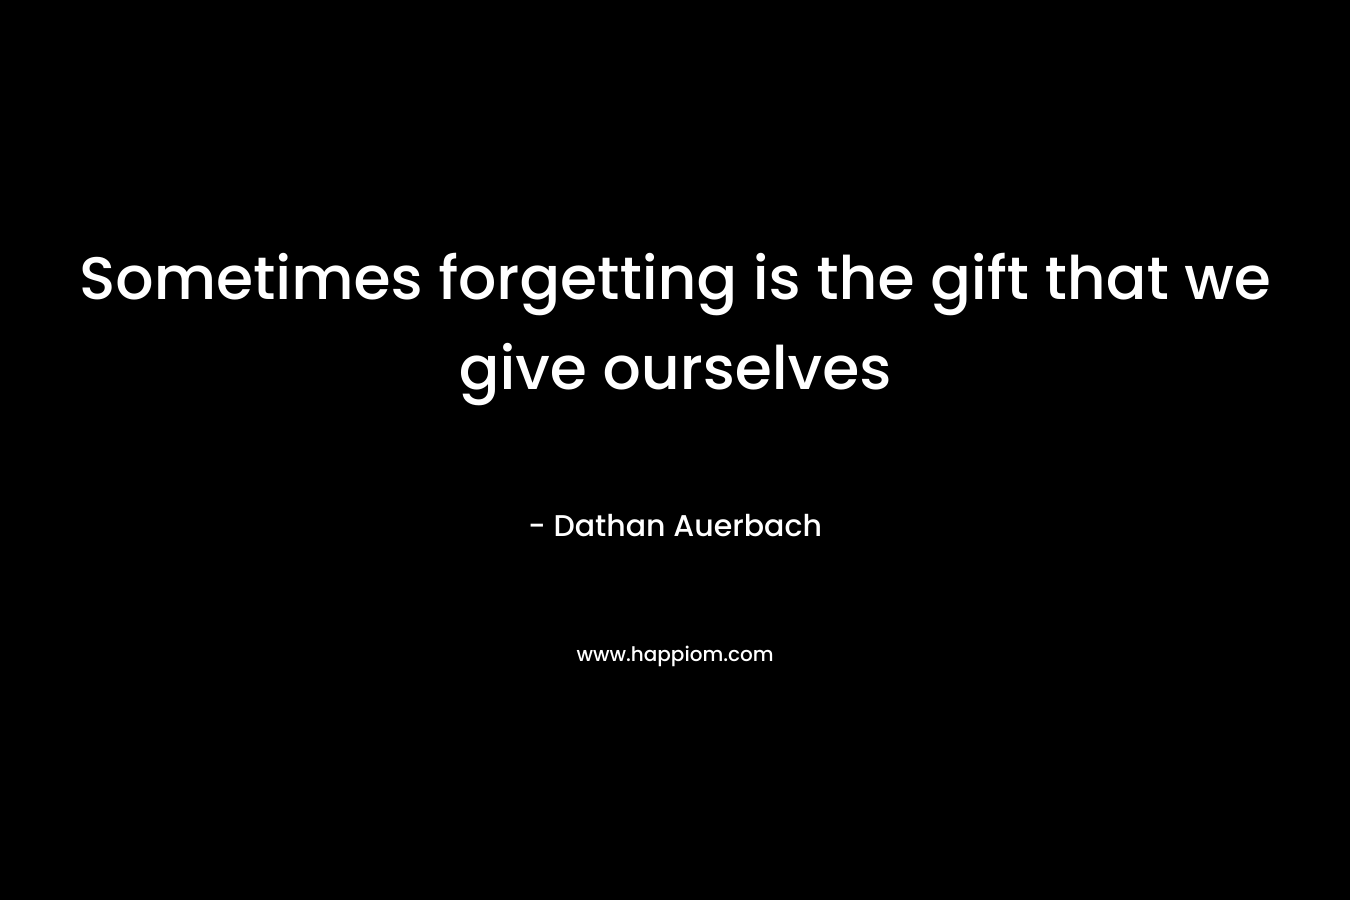 Sometimes forgetting is the gift that we give ourselves